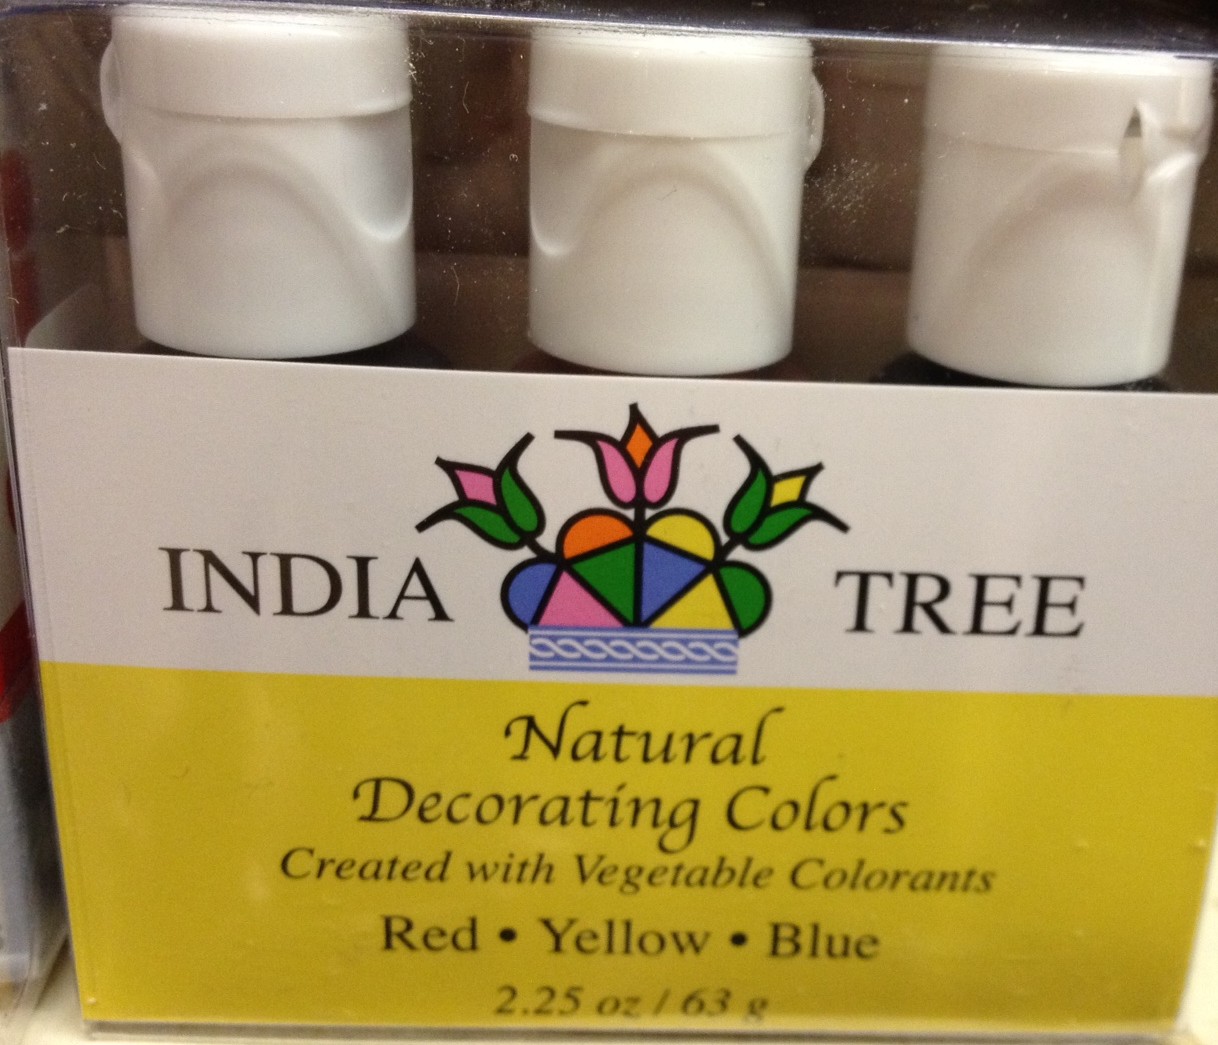 Accidentally Vegan: Natural Decorating Colors from India Tree!